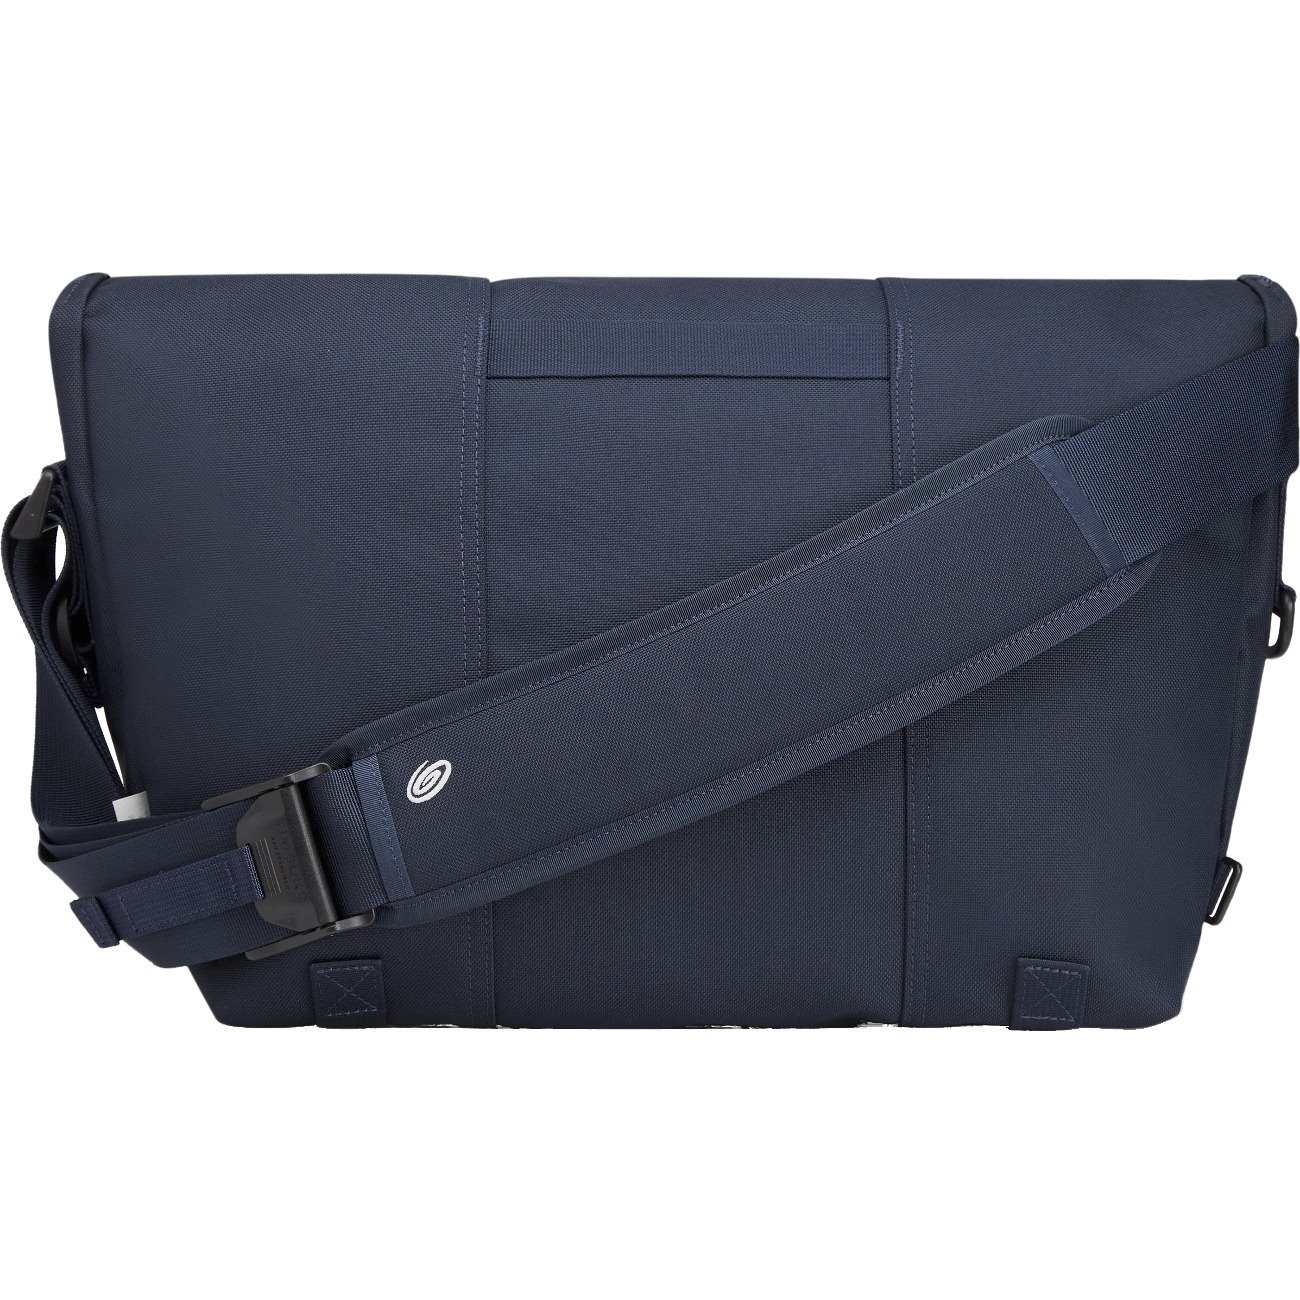 Timbuk2 Classic Messenger Carrying Case (Messenger) for 15" Notebook - Eco Nautical